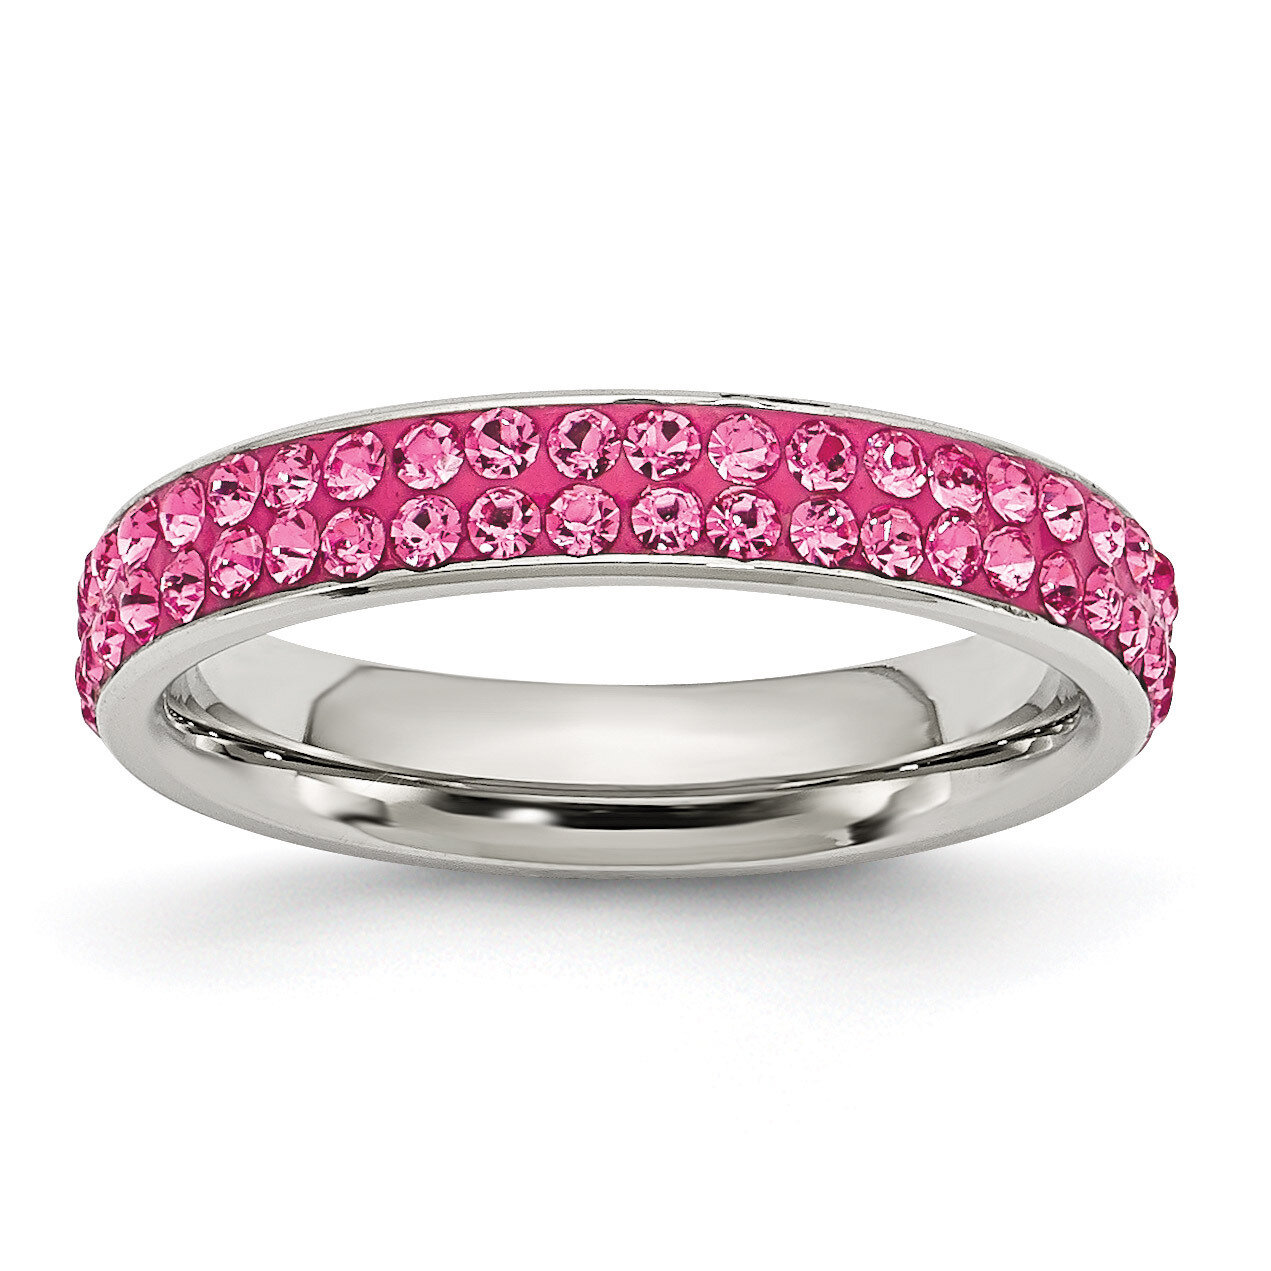 4mm Polished Pink Crystal Ring Stainless Steel SR262